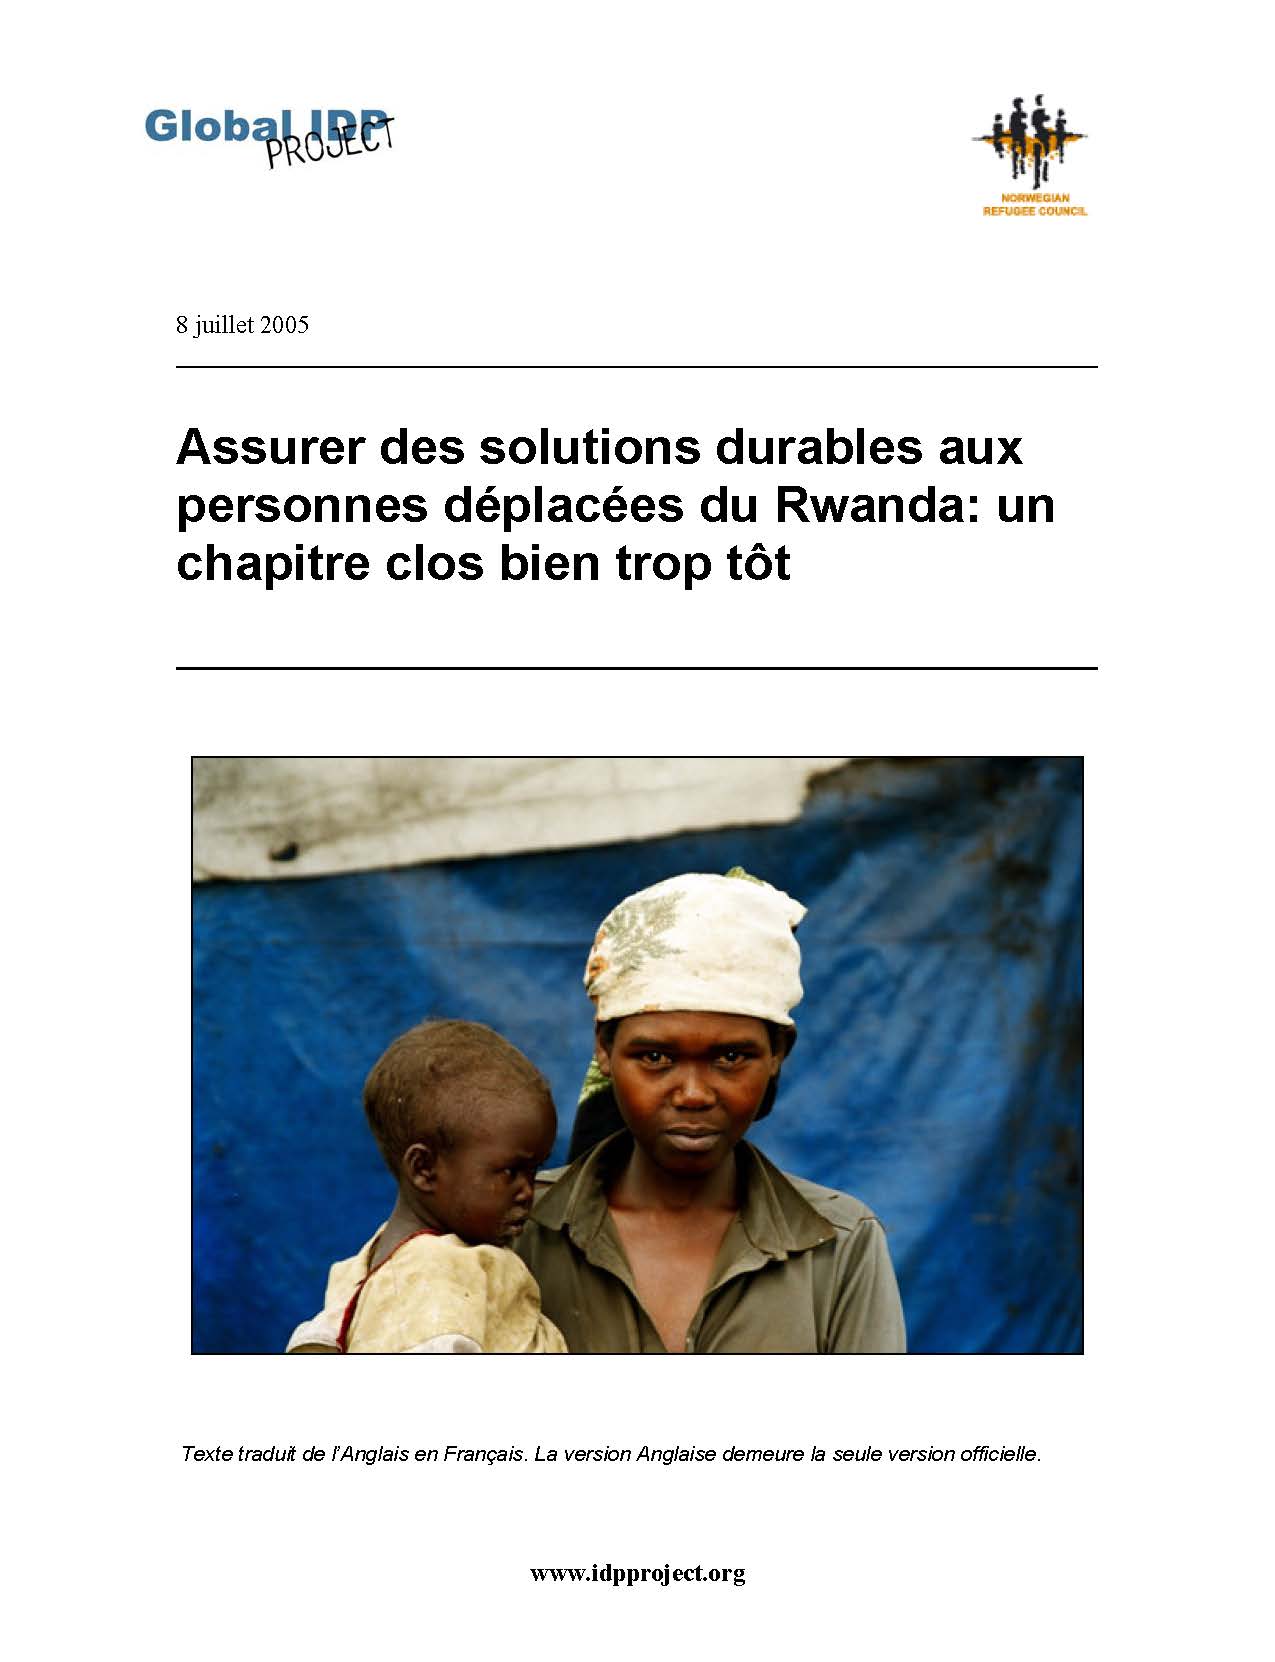 Ensuring durable solutions for Rwanda's displaced: a chapter closed too early